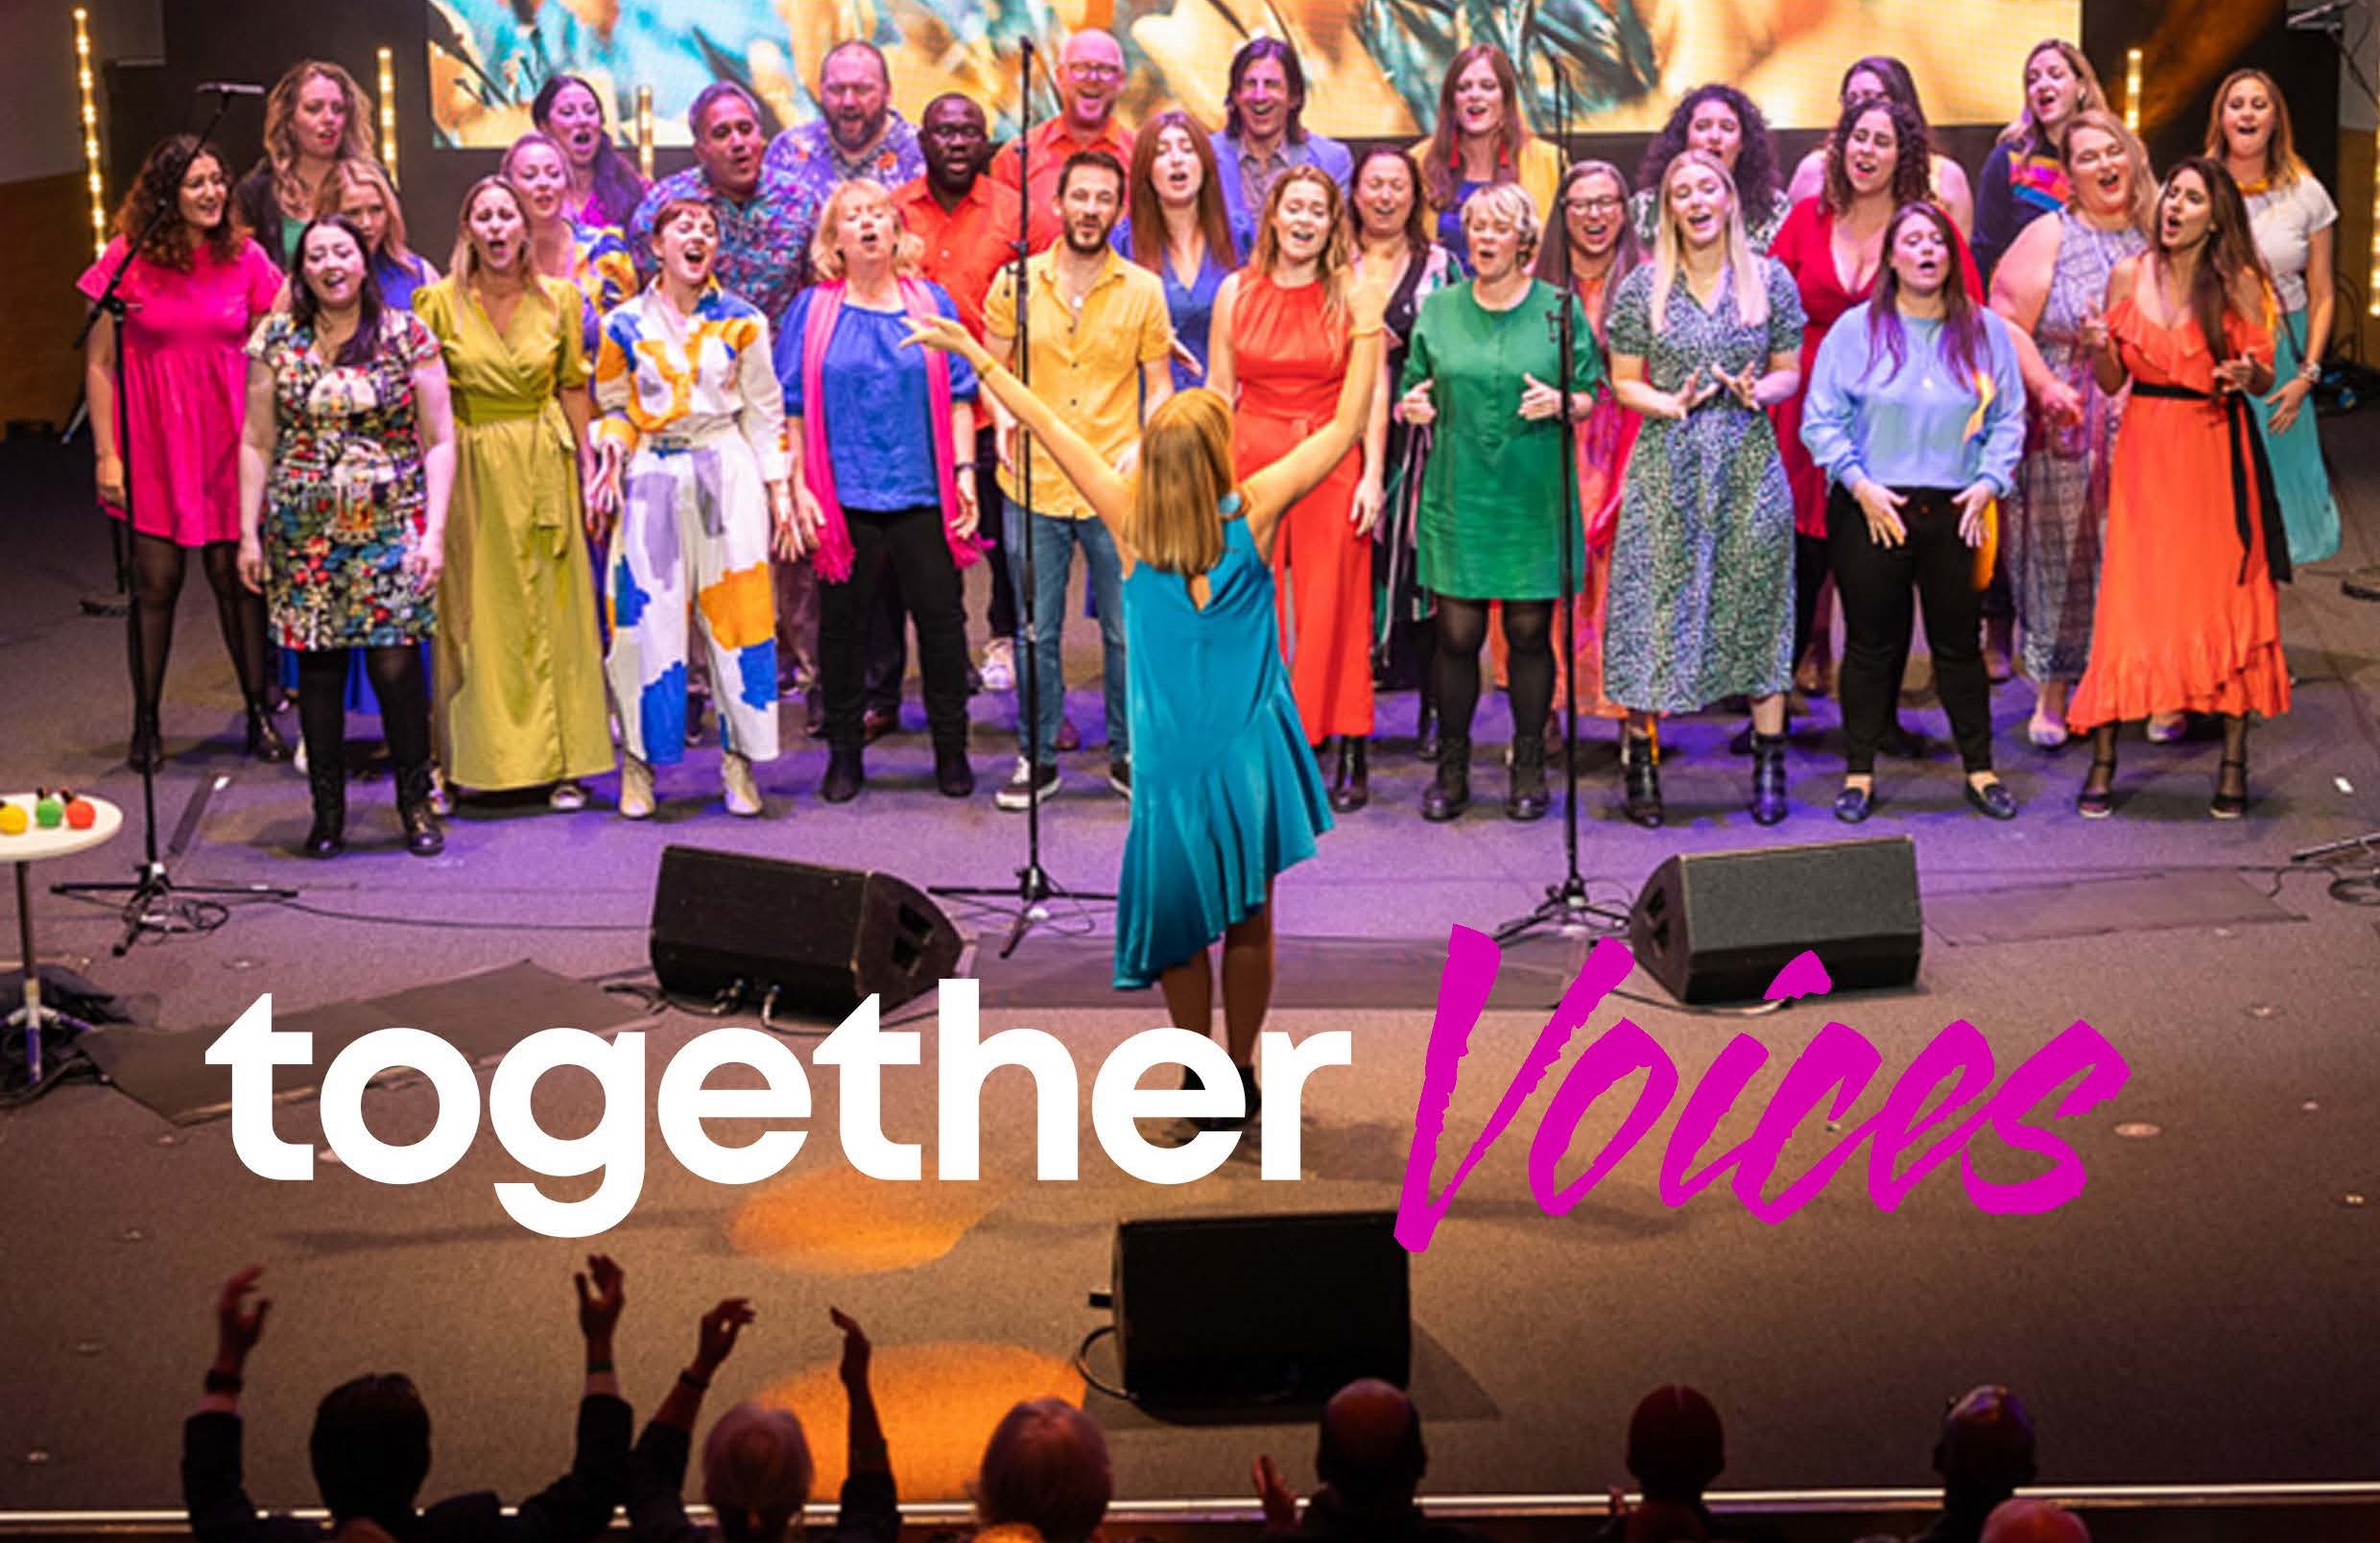 Choir photo from Together TV's event at BBC's theatre in 2022, with Together Voices layered on top